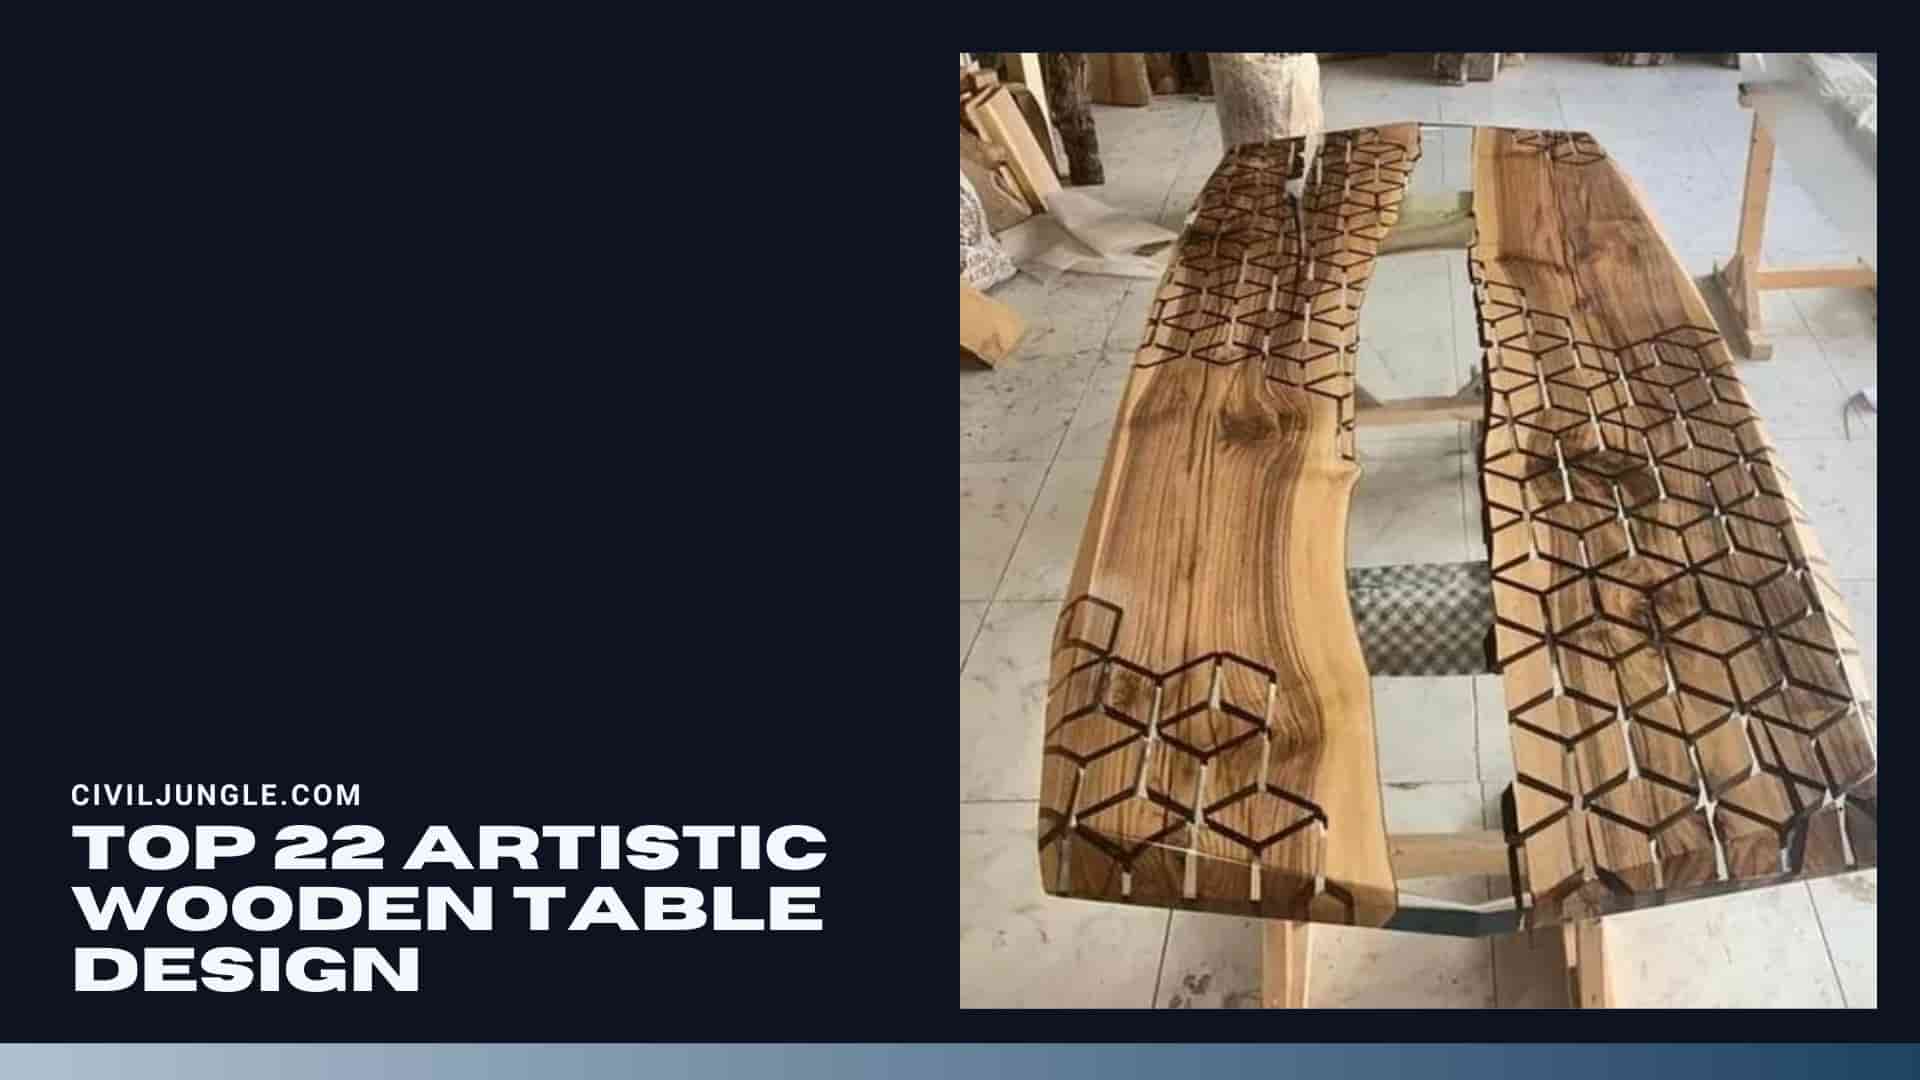 Top 22 Artistic Wooden Table Design